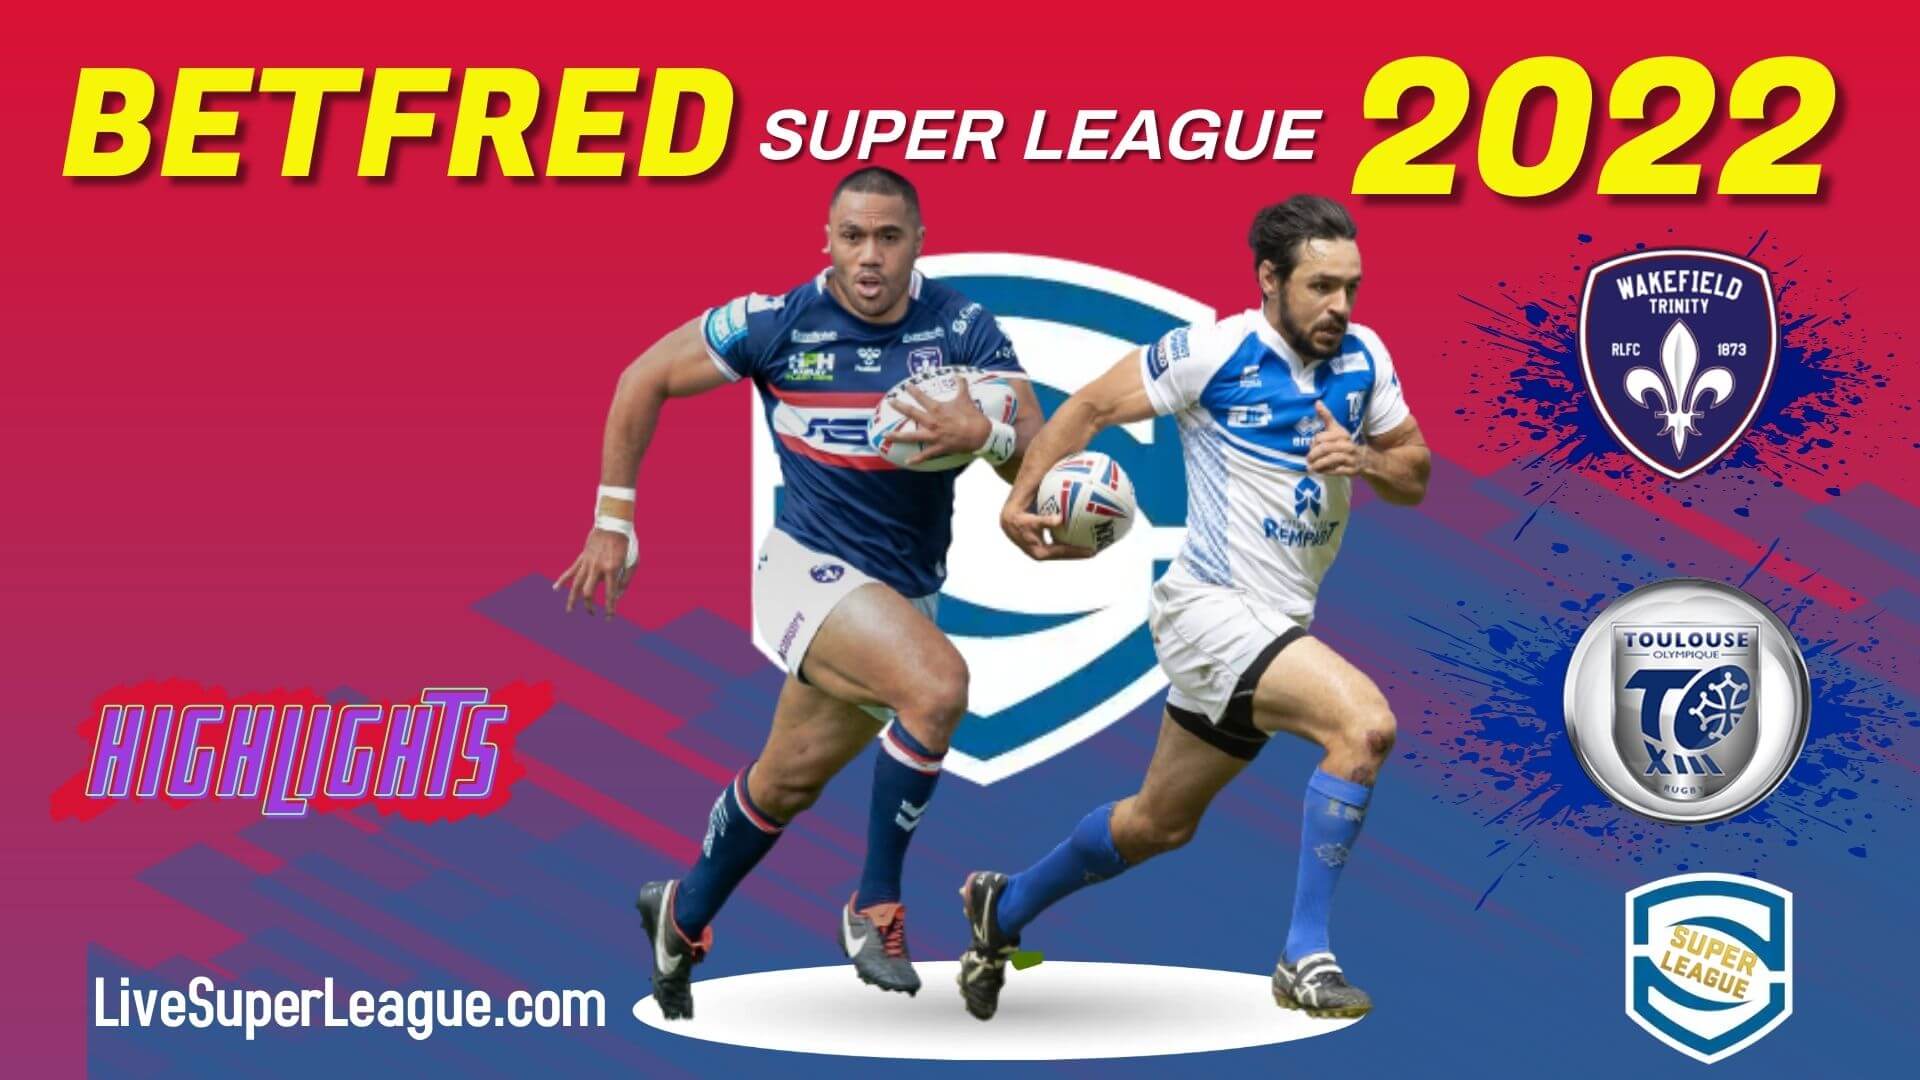 Wakefield Trinity Vs Toulouse Highlights 2022